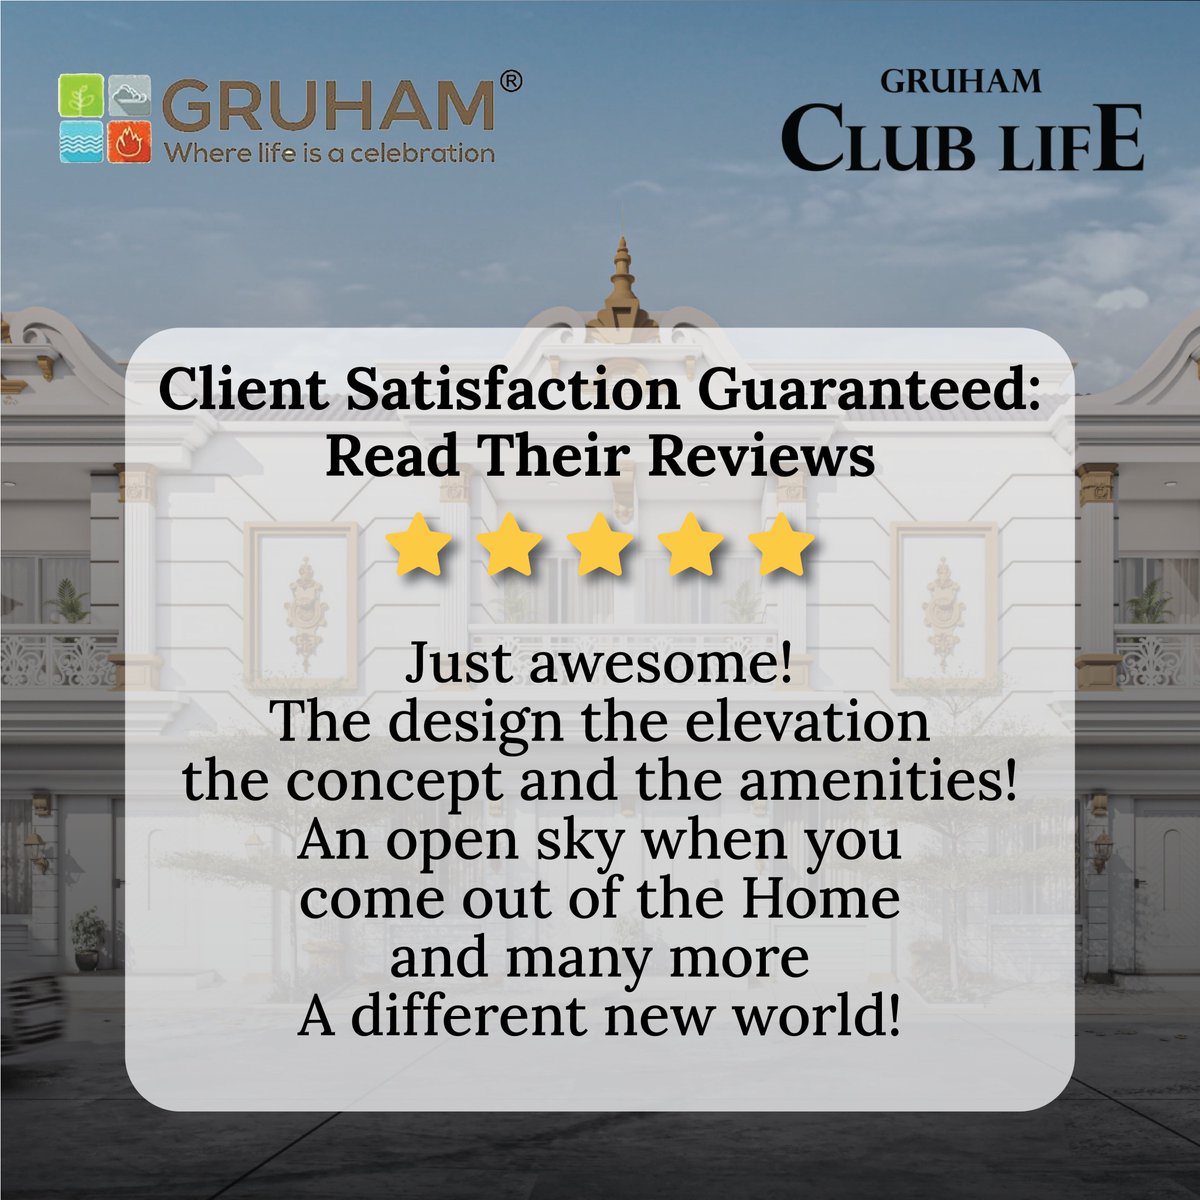 We are extremely grateful to receive some of the client testimonial which showcase our hard work and determination towards building this wonderful lifestyle.

#GruhamDevelopers #RealEstateDevelopers #Realestatelndia #RealEstate #testimonial #clienttestimonial #clientreview